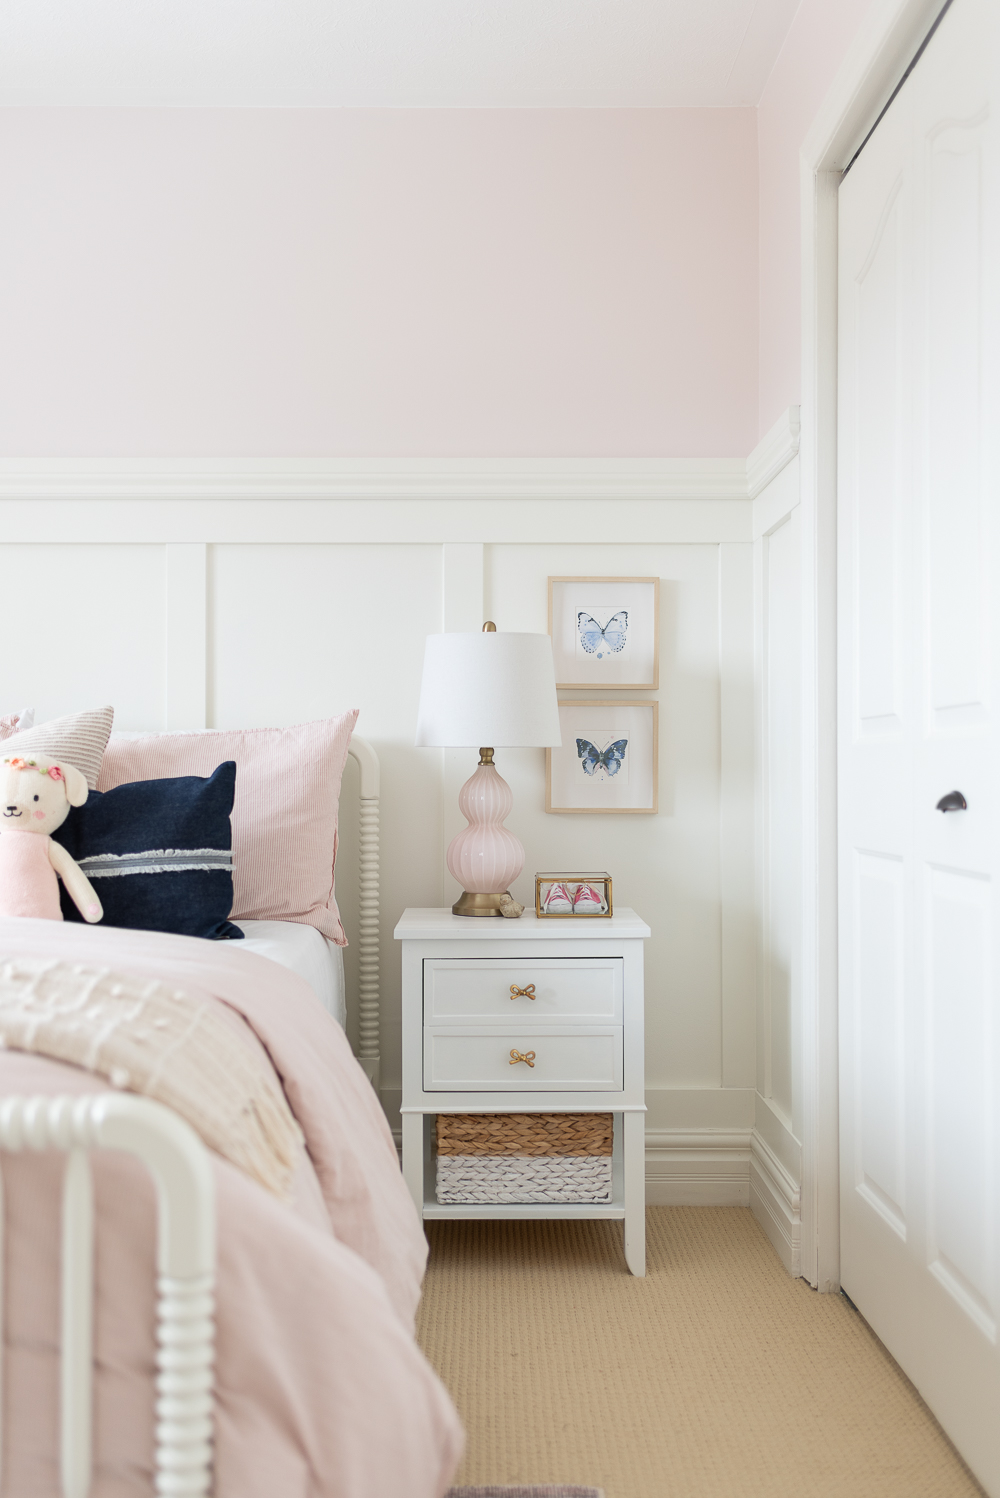 https://www.nickandalicia.com/wp-content/uploads/2022/03/Sweet-and-Playful-Kids-Bedroom-in-Shades-of-Pink-and-Blue-9581.jpg